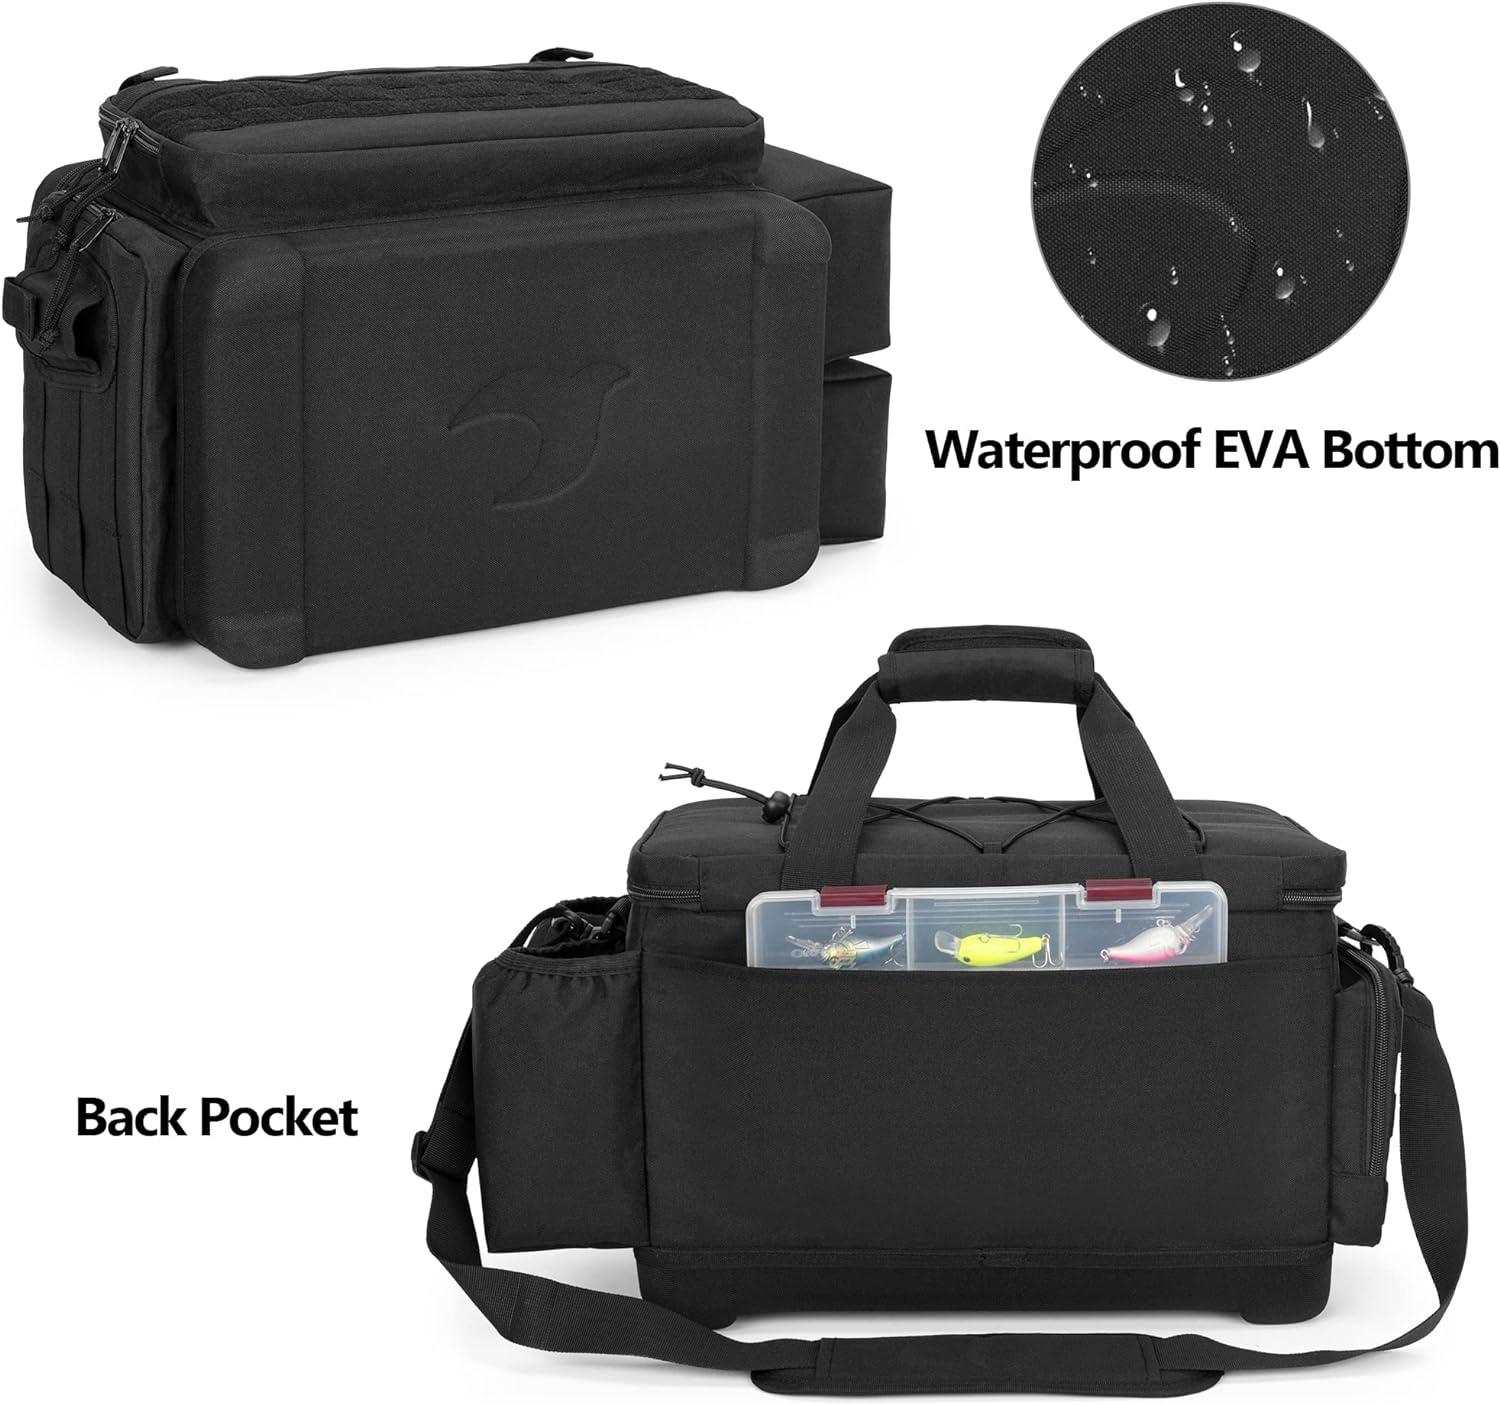  VIGEGARI Fishing Tackle Bag with EVA Bottom Waterproof, Soft  Tackle Box Bag with Rod Holder, Fishing Gear Storage with Cooler Bag for  Beverage, Fishing Bags Only（No Tackle Tray) : Sports